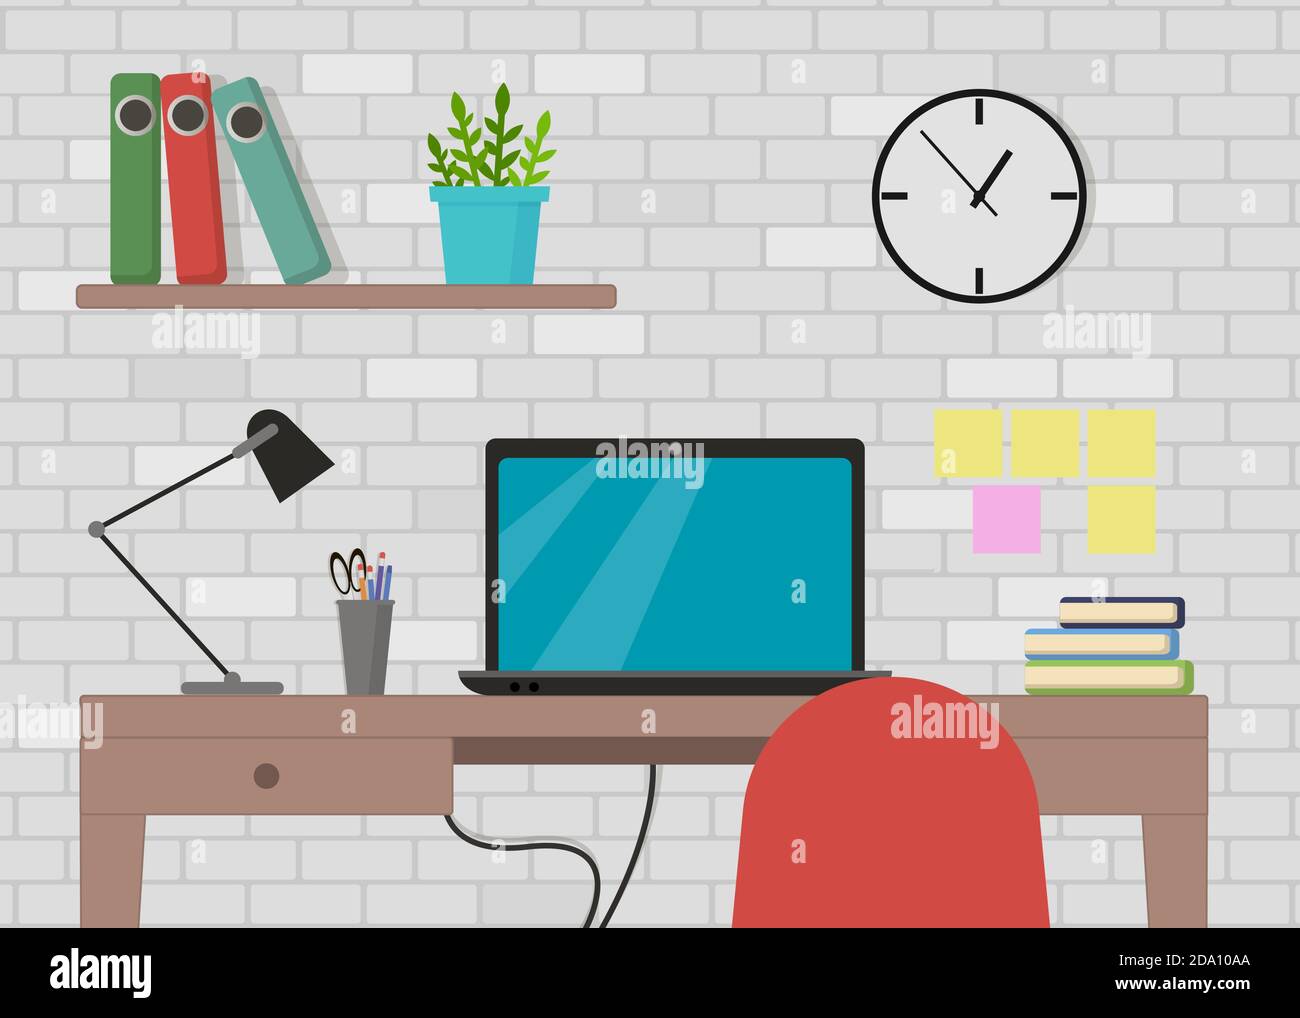 Vector illustration in flat style interior of working place with computer, lamp, to do list, working programs on monitor, organizer, shelf, books on Stock Vector